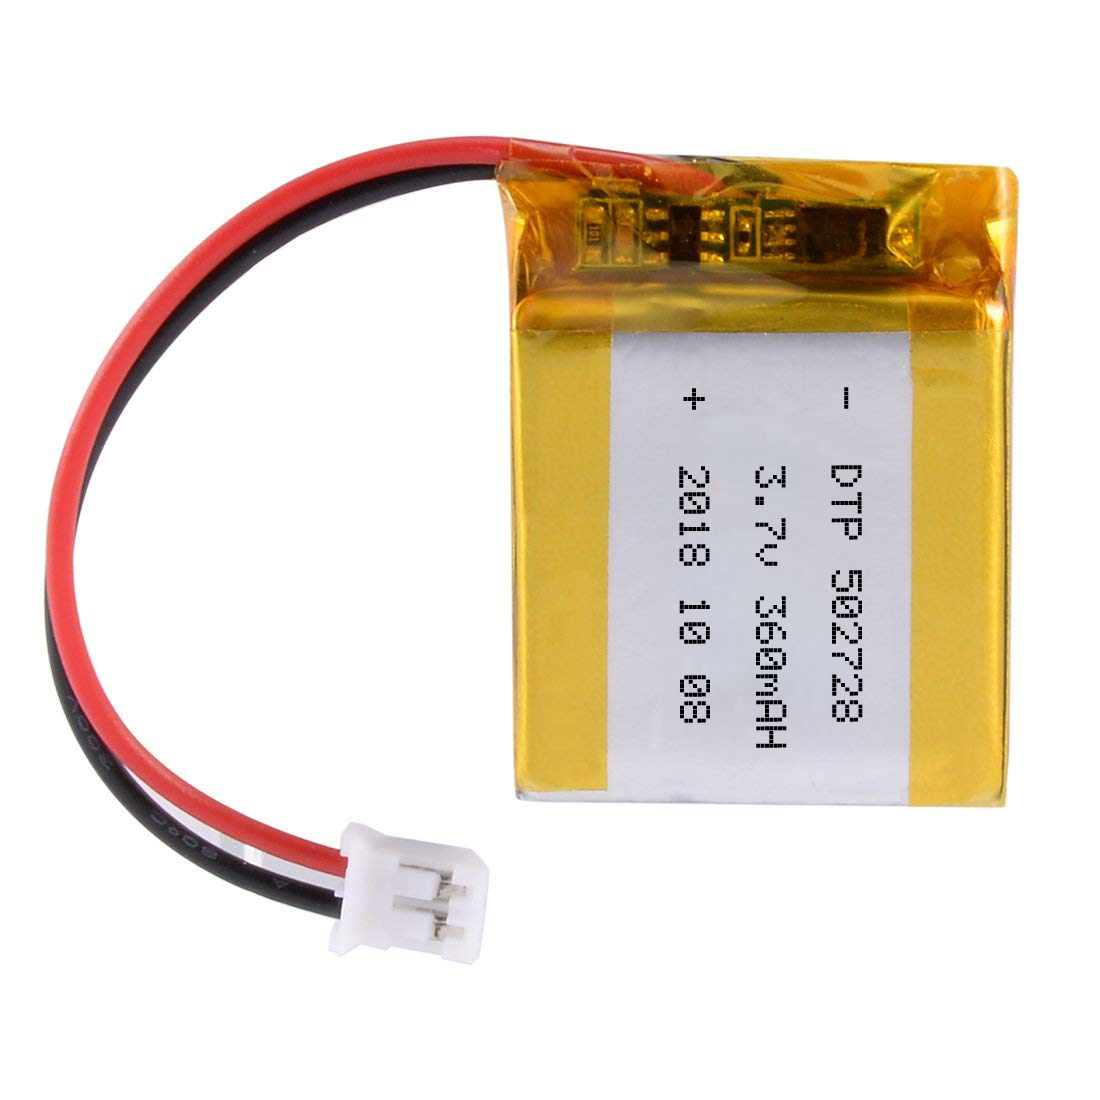 DTP502728 3.7V 360mAh Li Polymer Battery with Protection Circuit and JST Connector